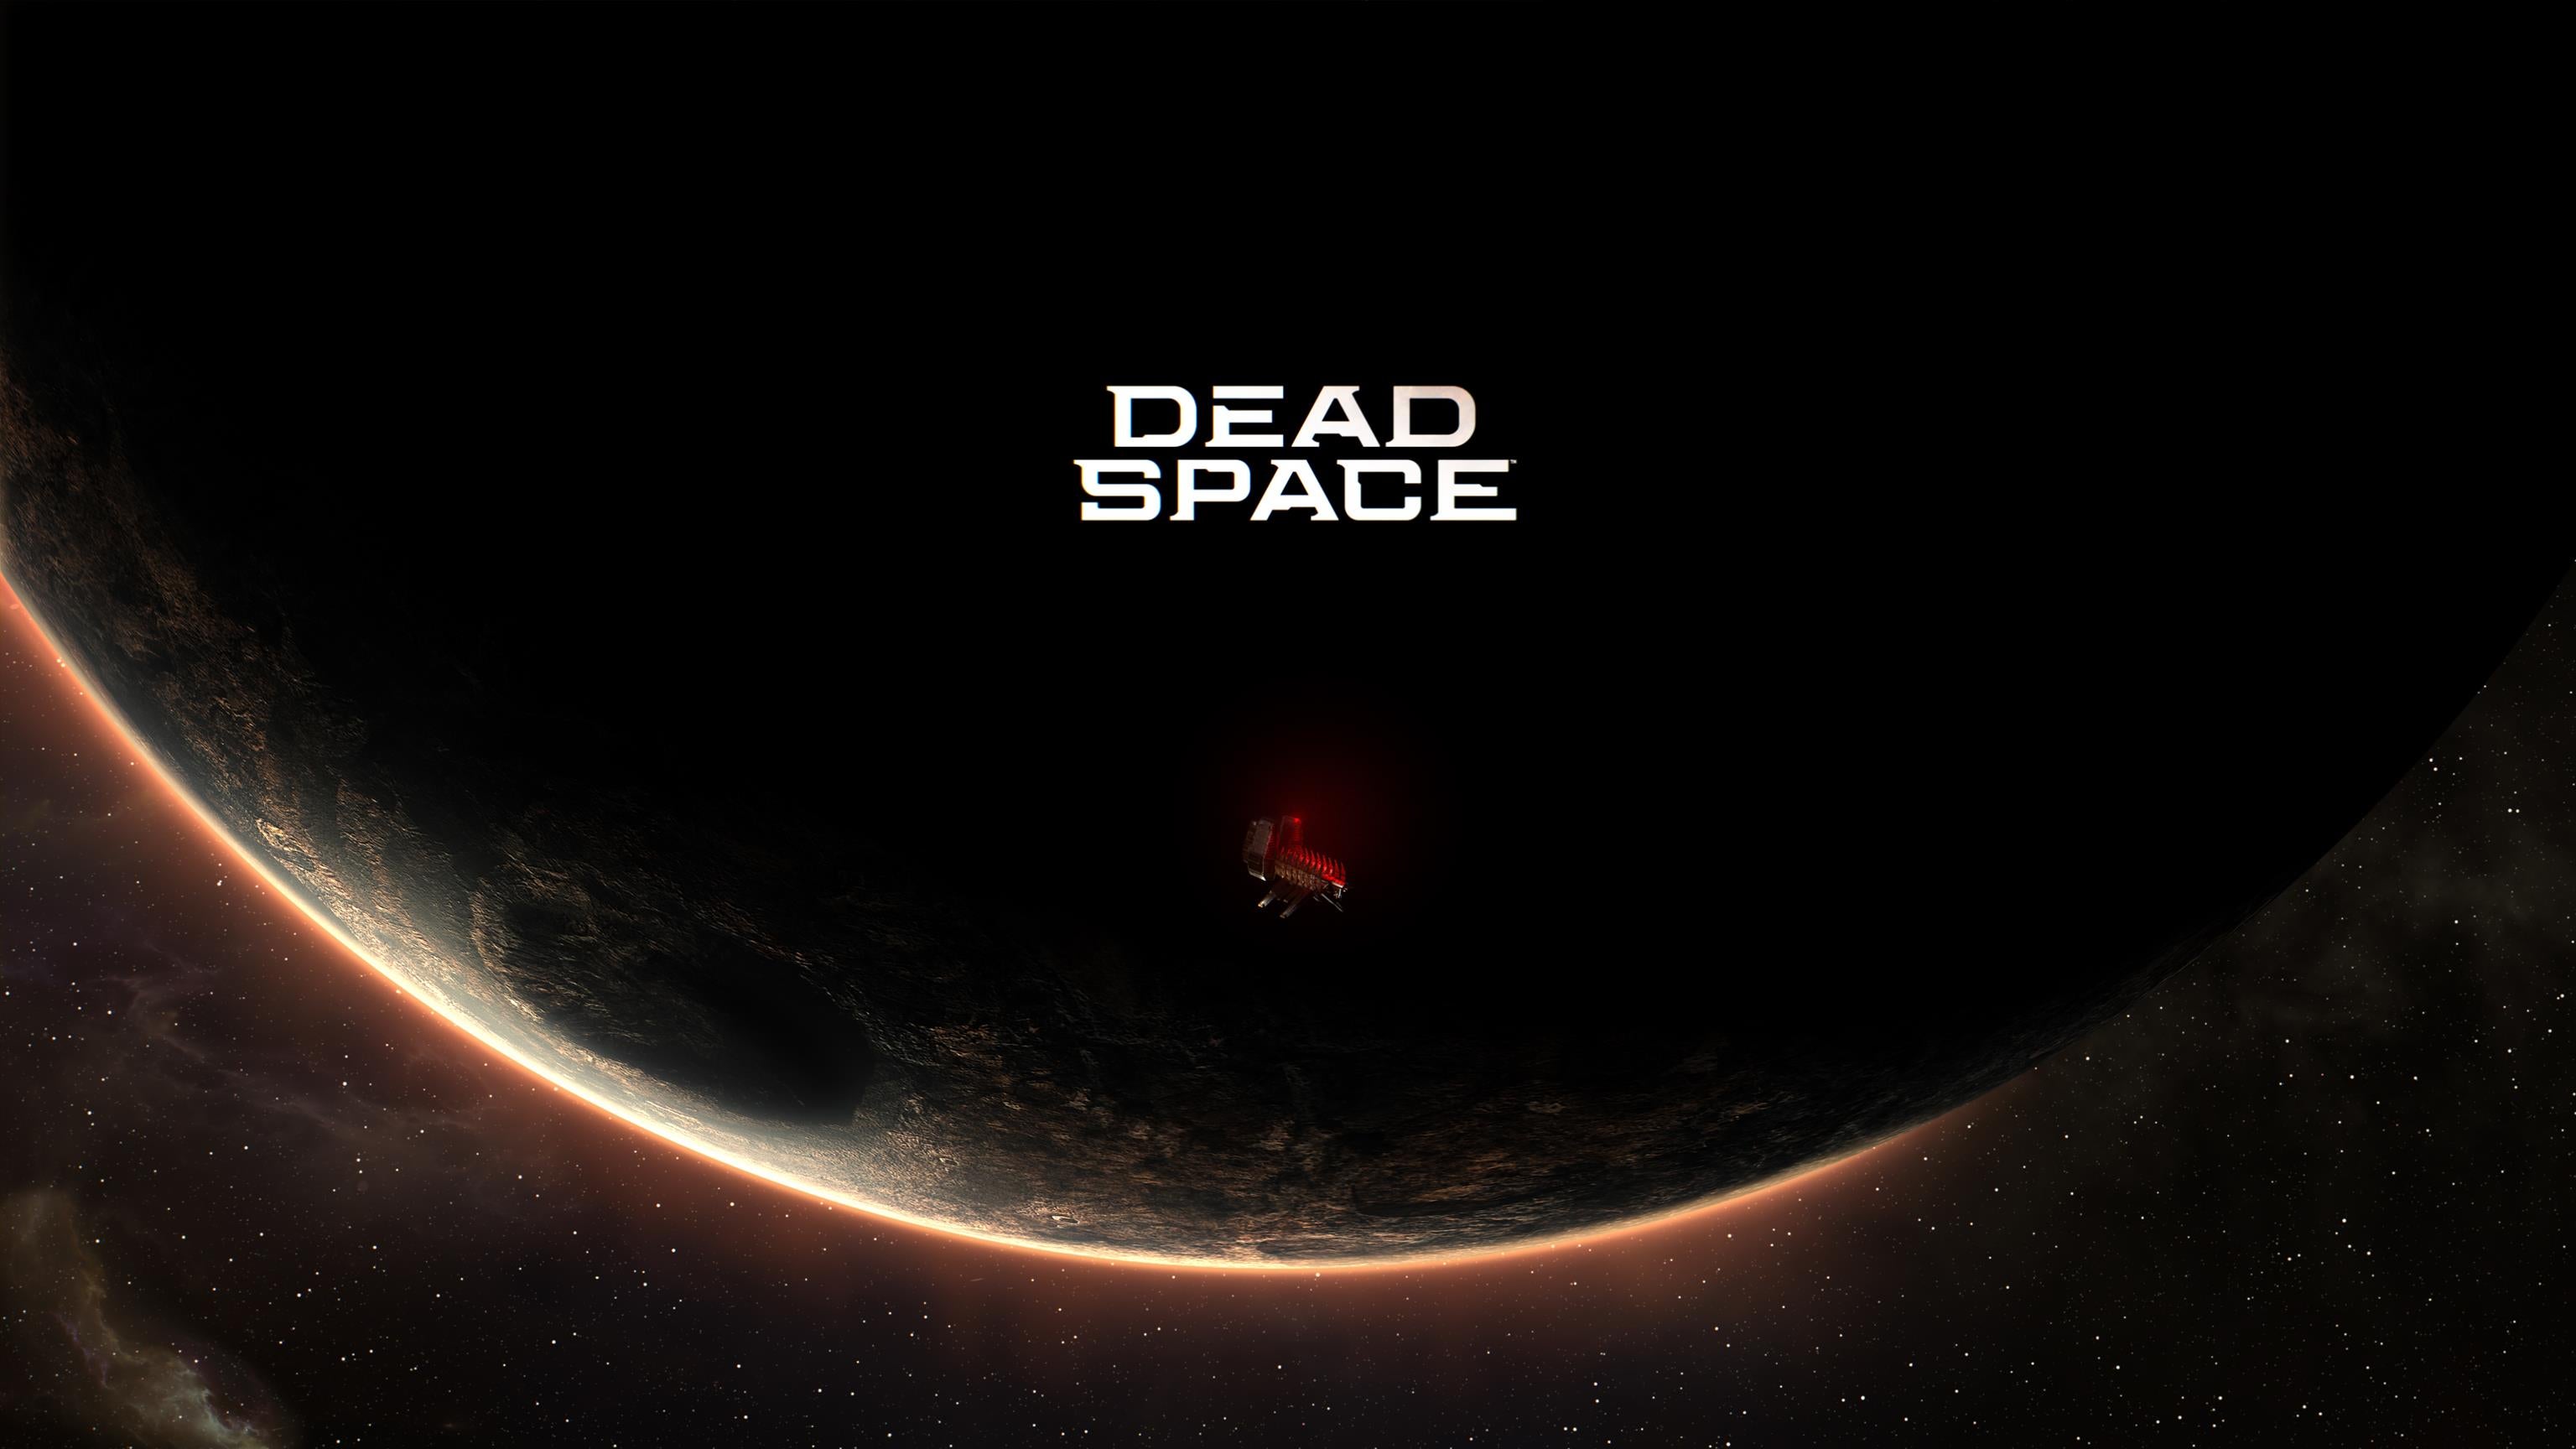 Image for The Dead Space remake is being directed by Assassin's Creed Valhalla's director